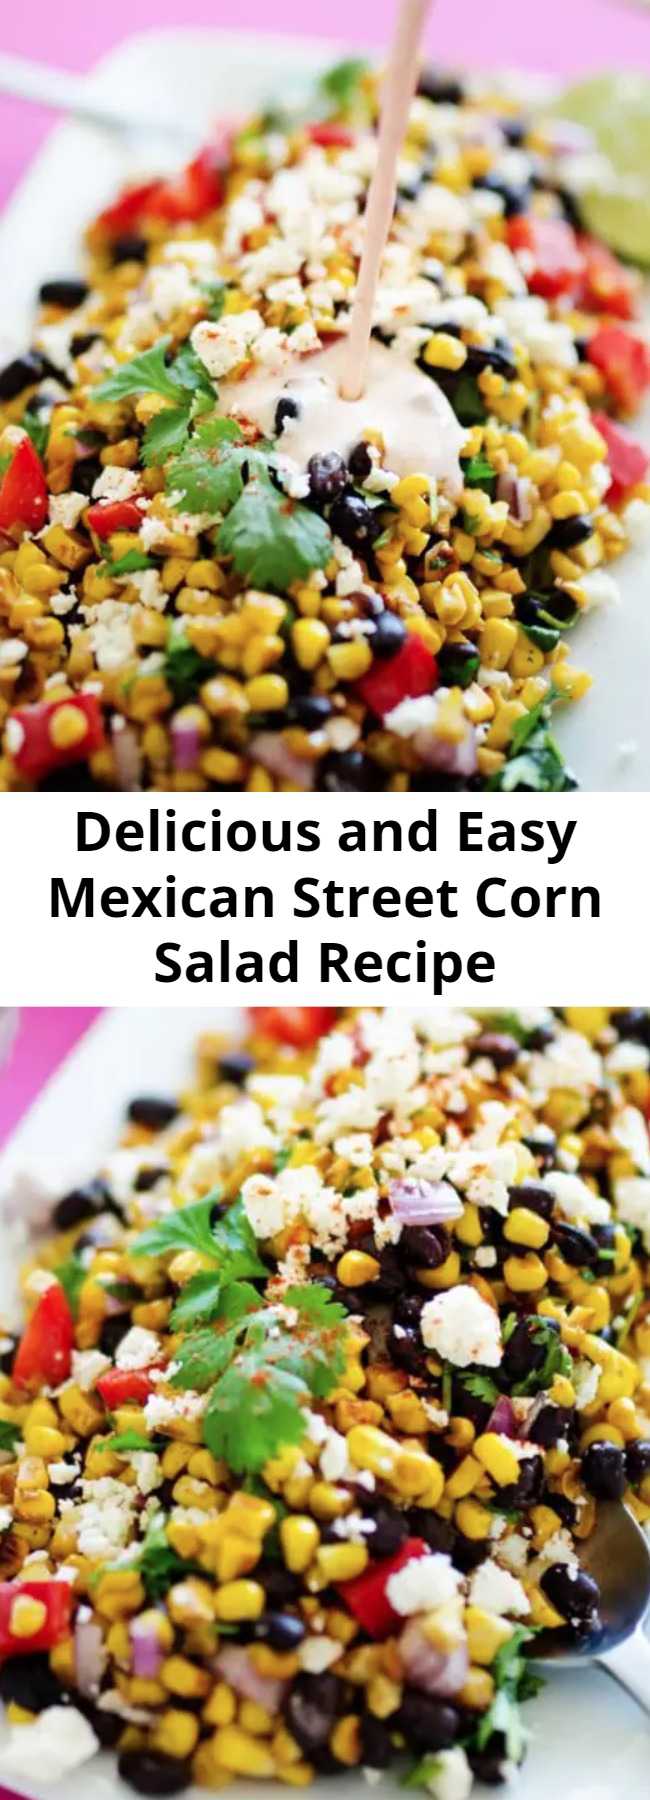 Delicious and Easy Mexican Street Corn Salad Recipe - This Mexican Street Corn Salad is a healthy, simple take on elote, the delicious Mexican street vendor version of corn on the cob! #vegetarianrecipes #mexicanrecipes #texmex #healthy #dinner #potluck